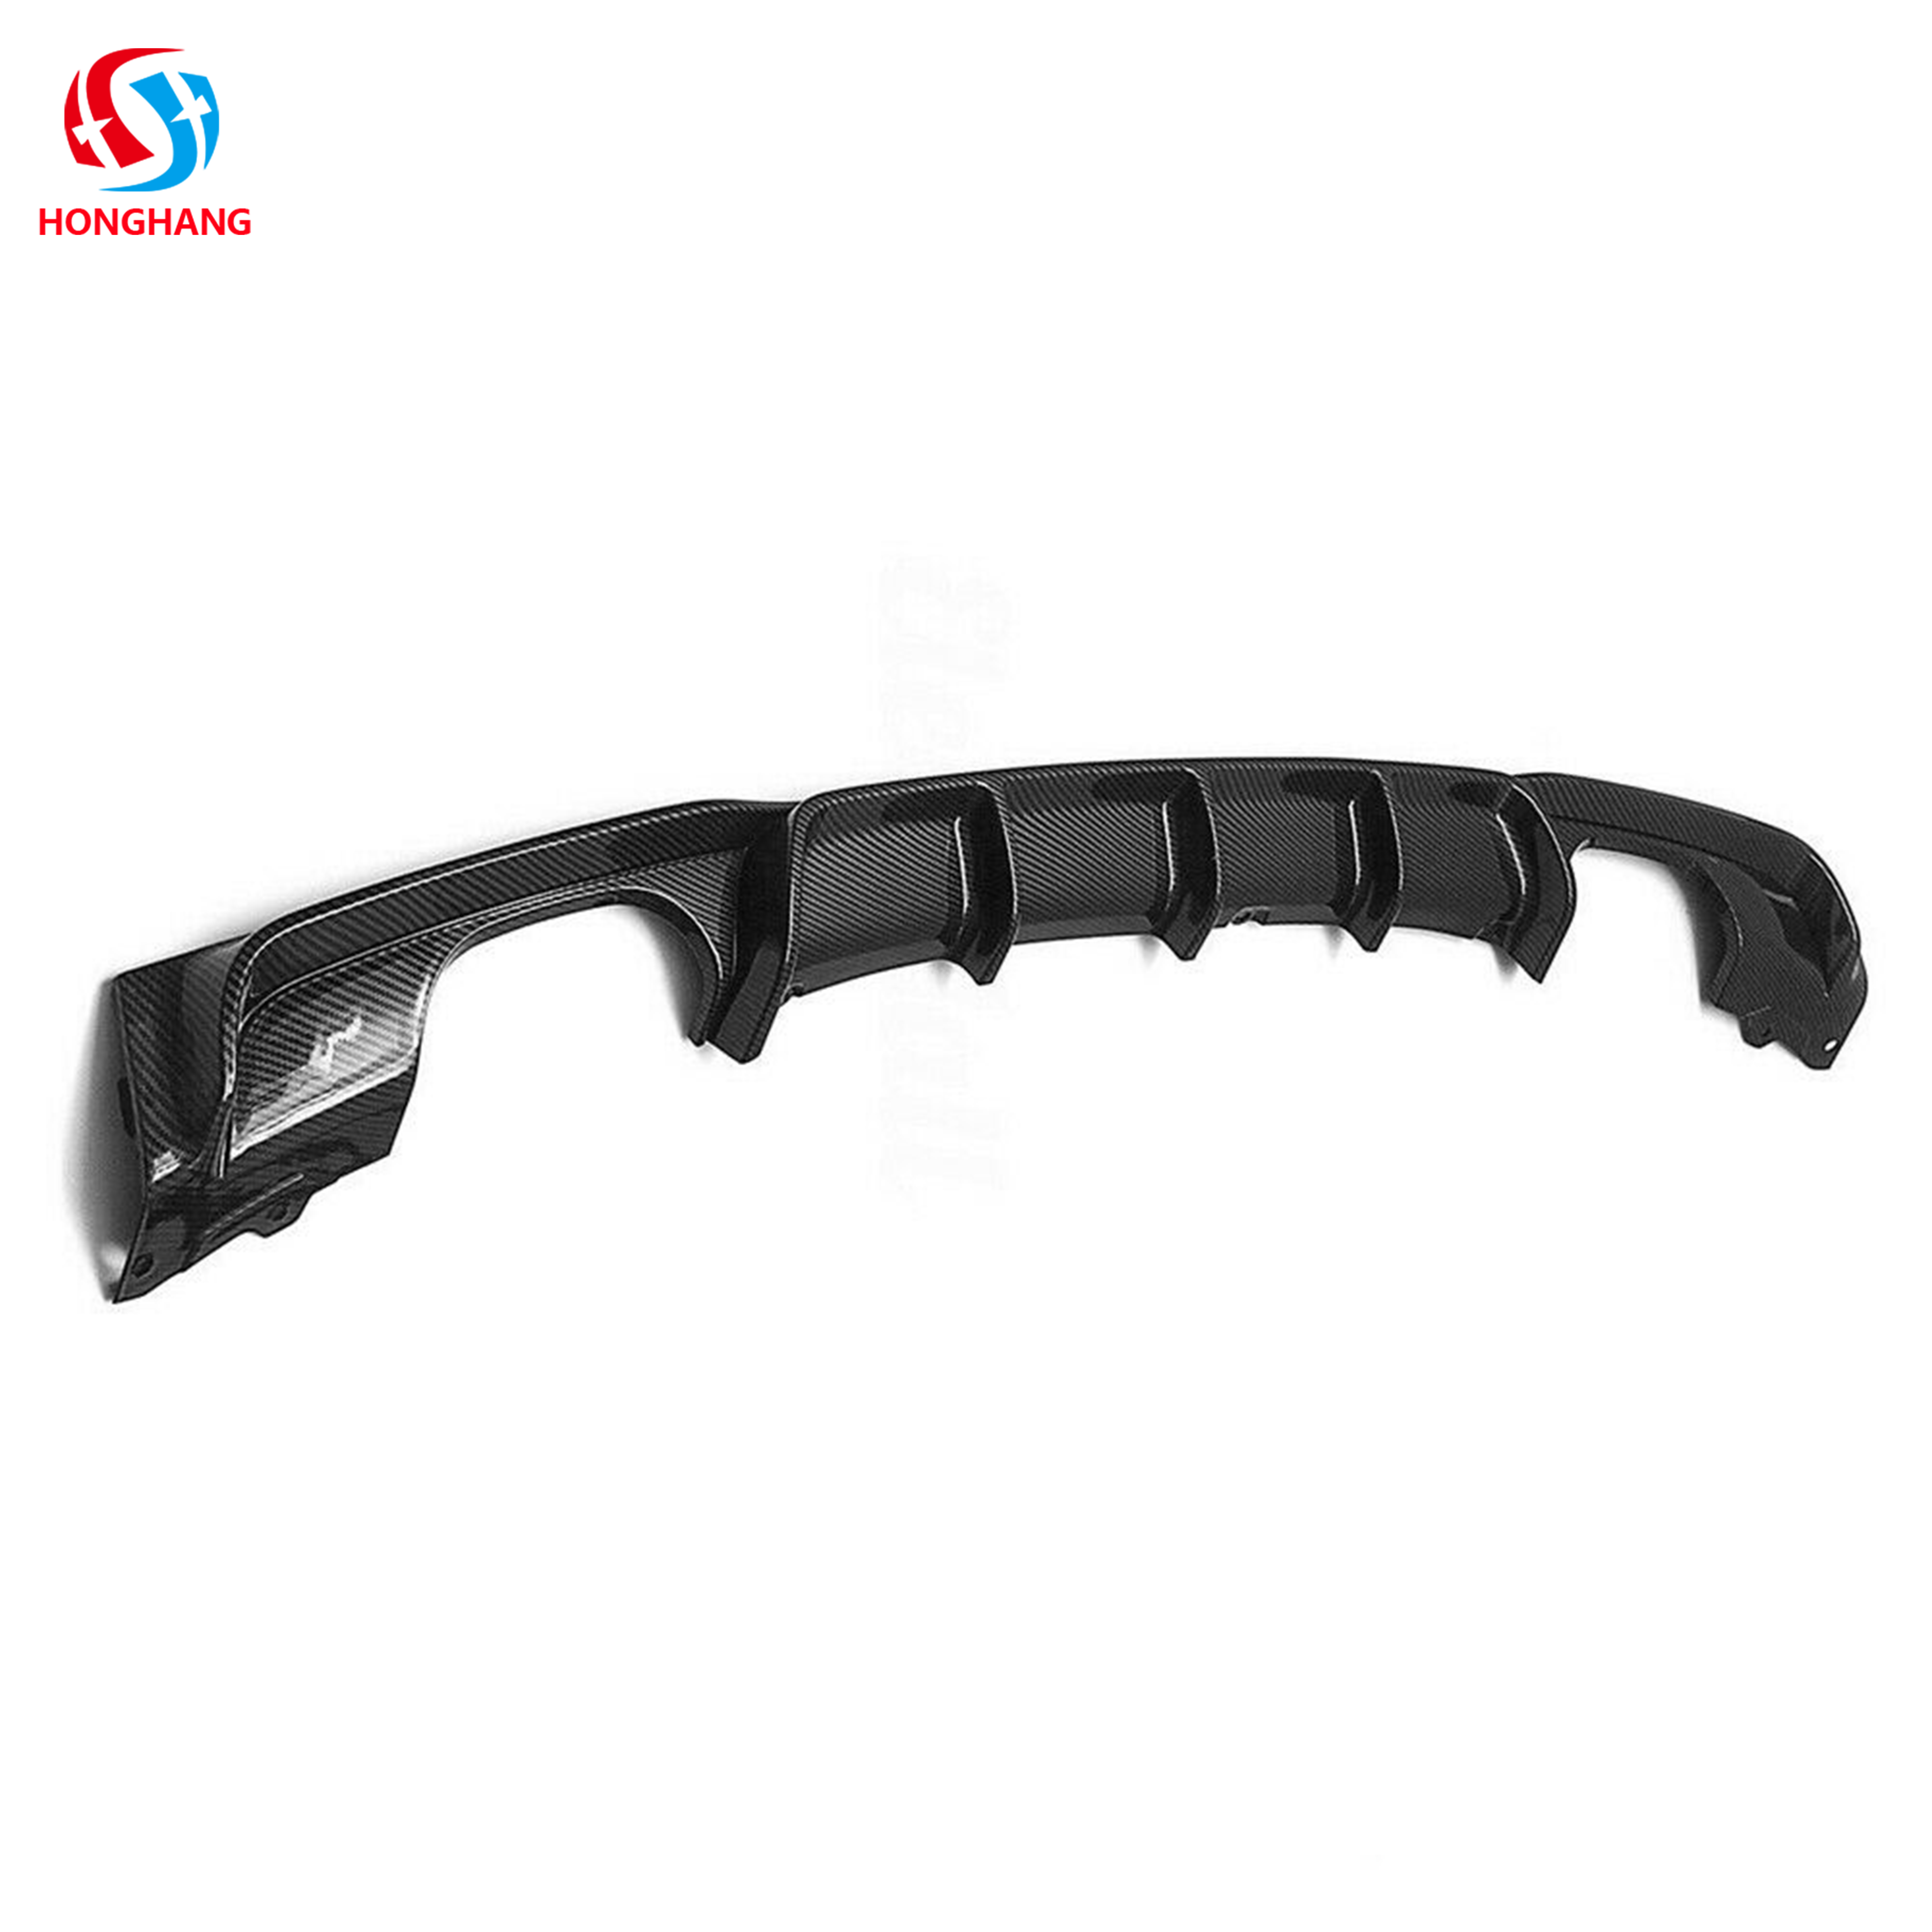 MP Style Rear Bumper Diffuser for Bmw 5 Series G30